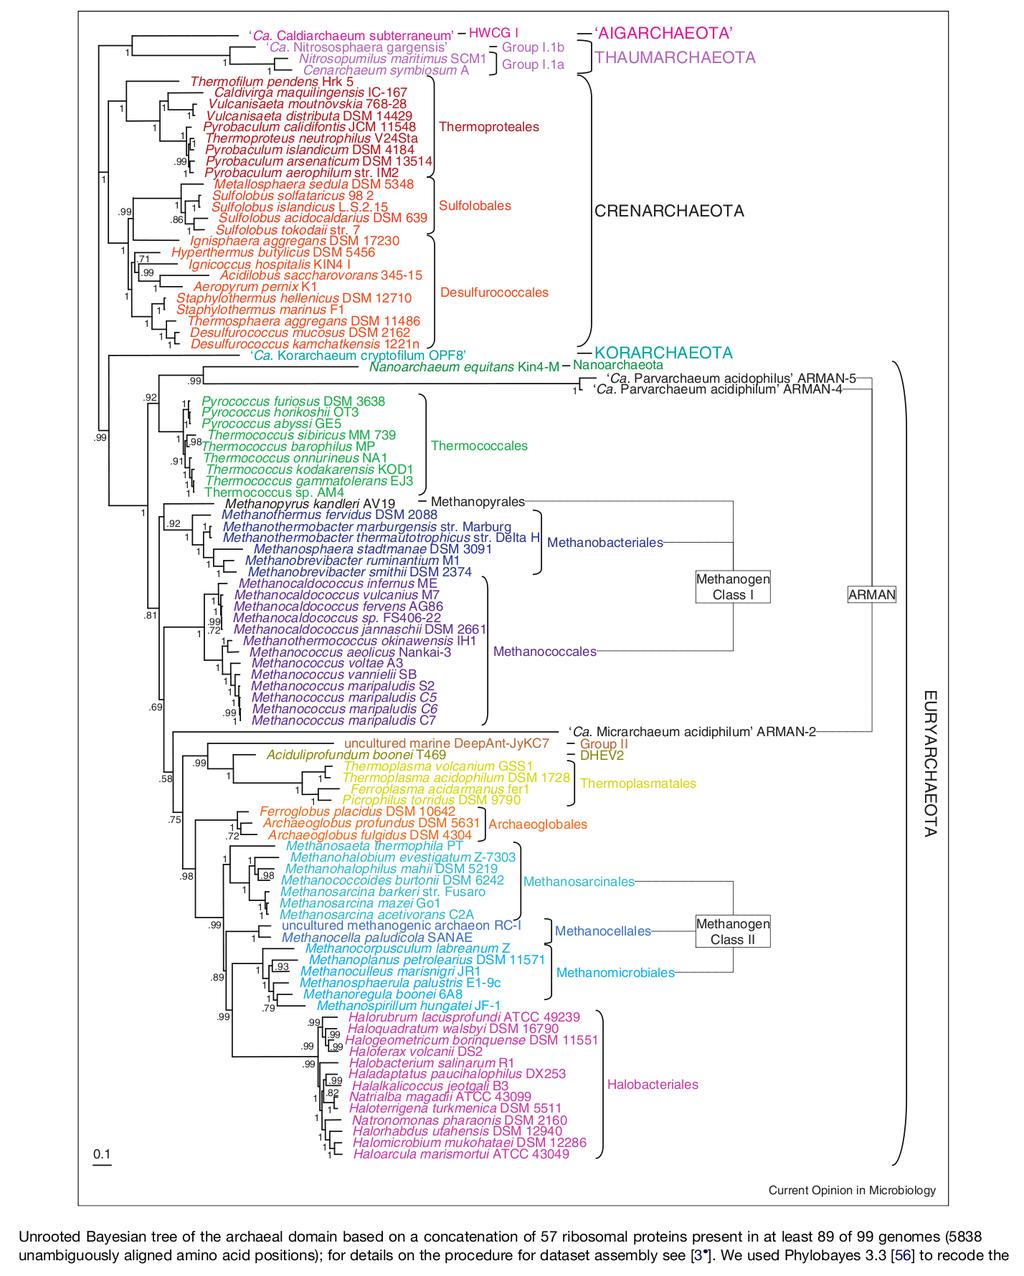 Adaptation to halophily in Archaea : MalDH evolution Brochier-Armanet, Forterre and Gribaldo.